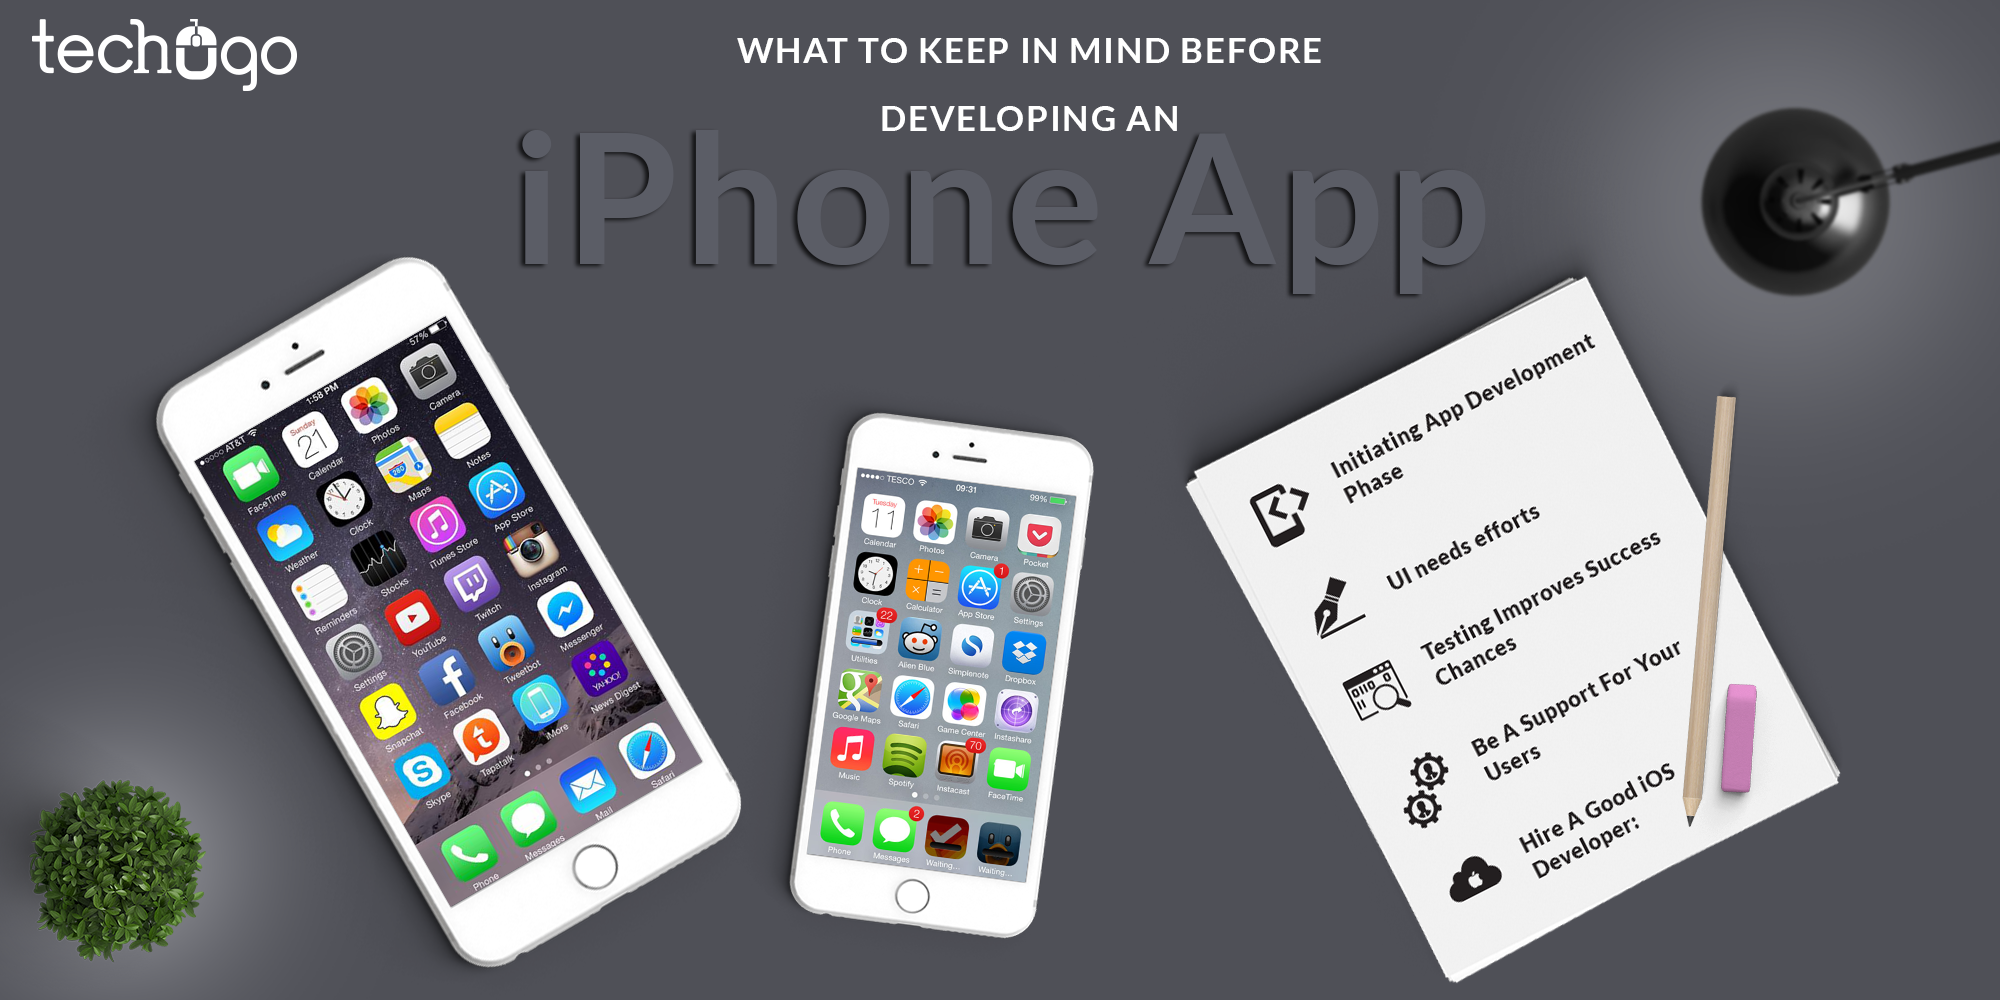 What To Keep In Mind Before Developing An iPhone App